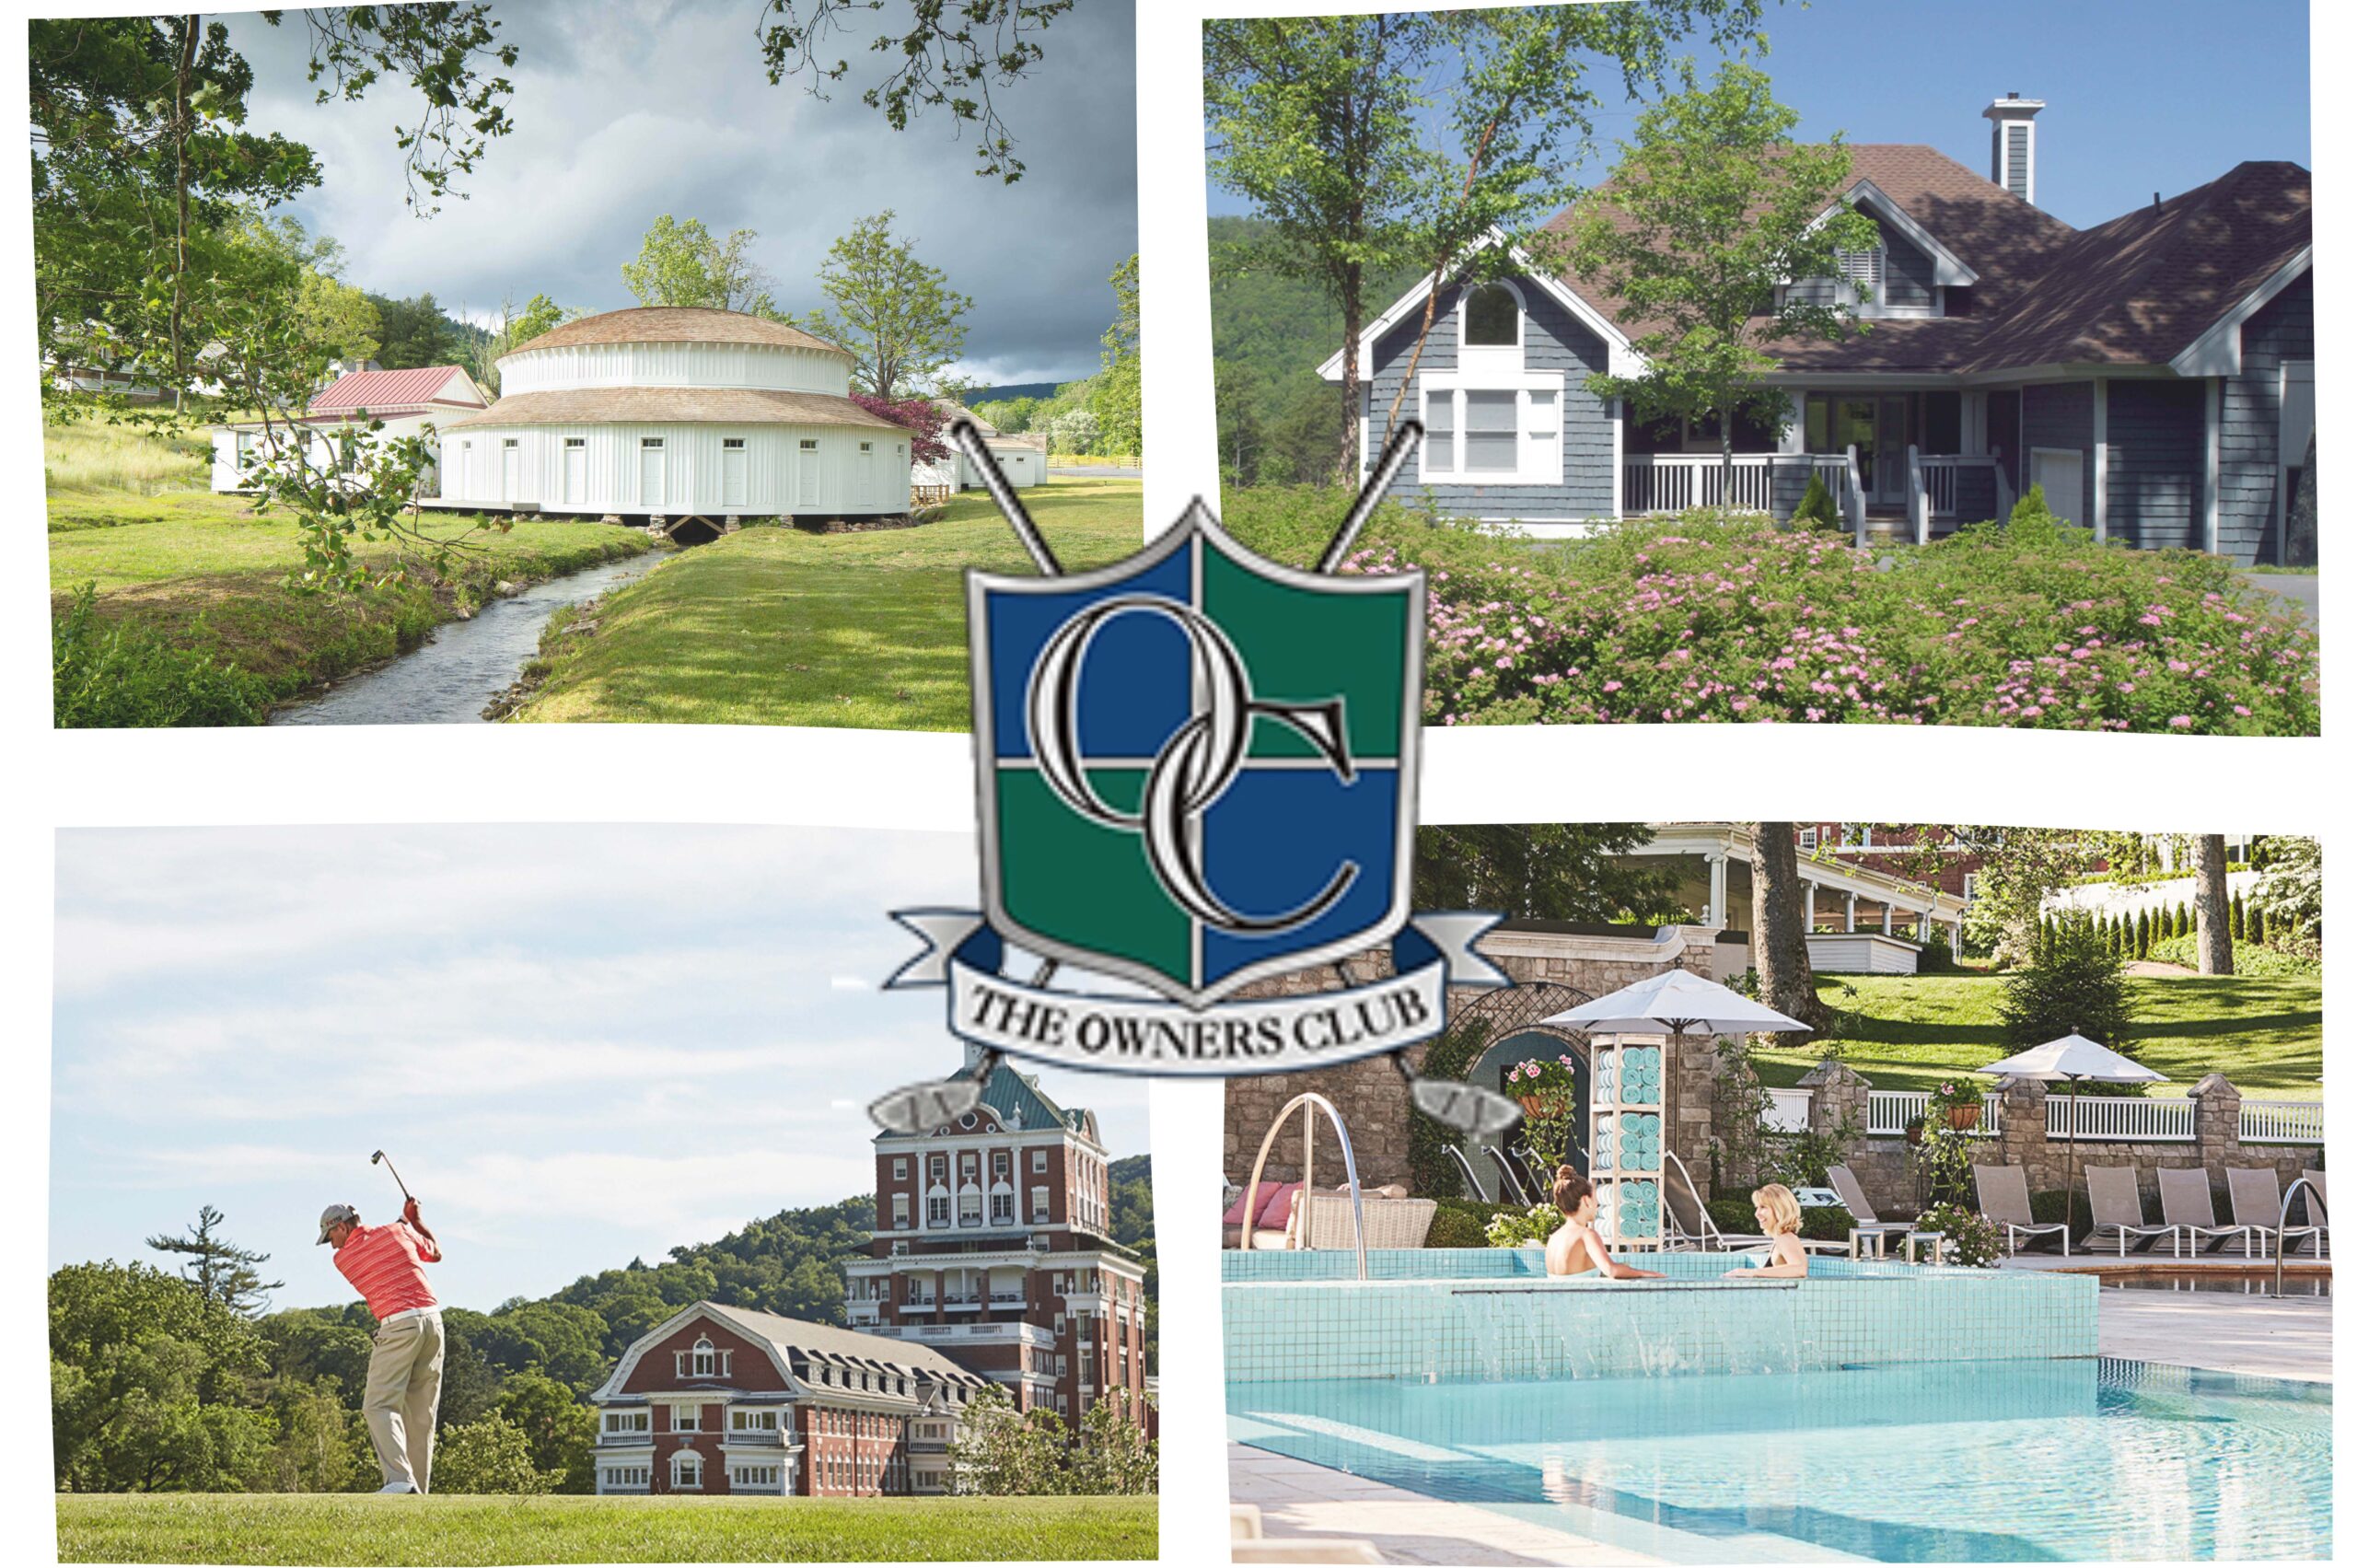 4 photos of the Owner's Club at the Homestead including an indoor hot spring, a house, an golfer and a pool with the Owner's Club logo